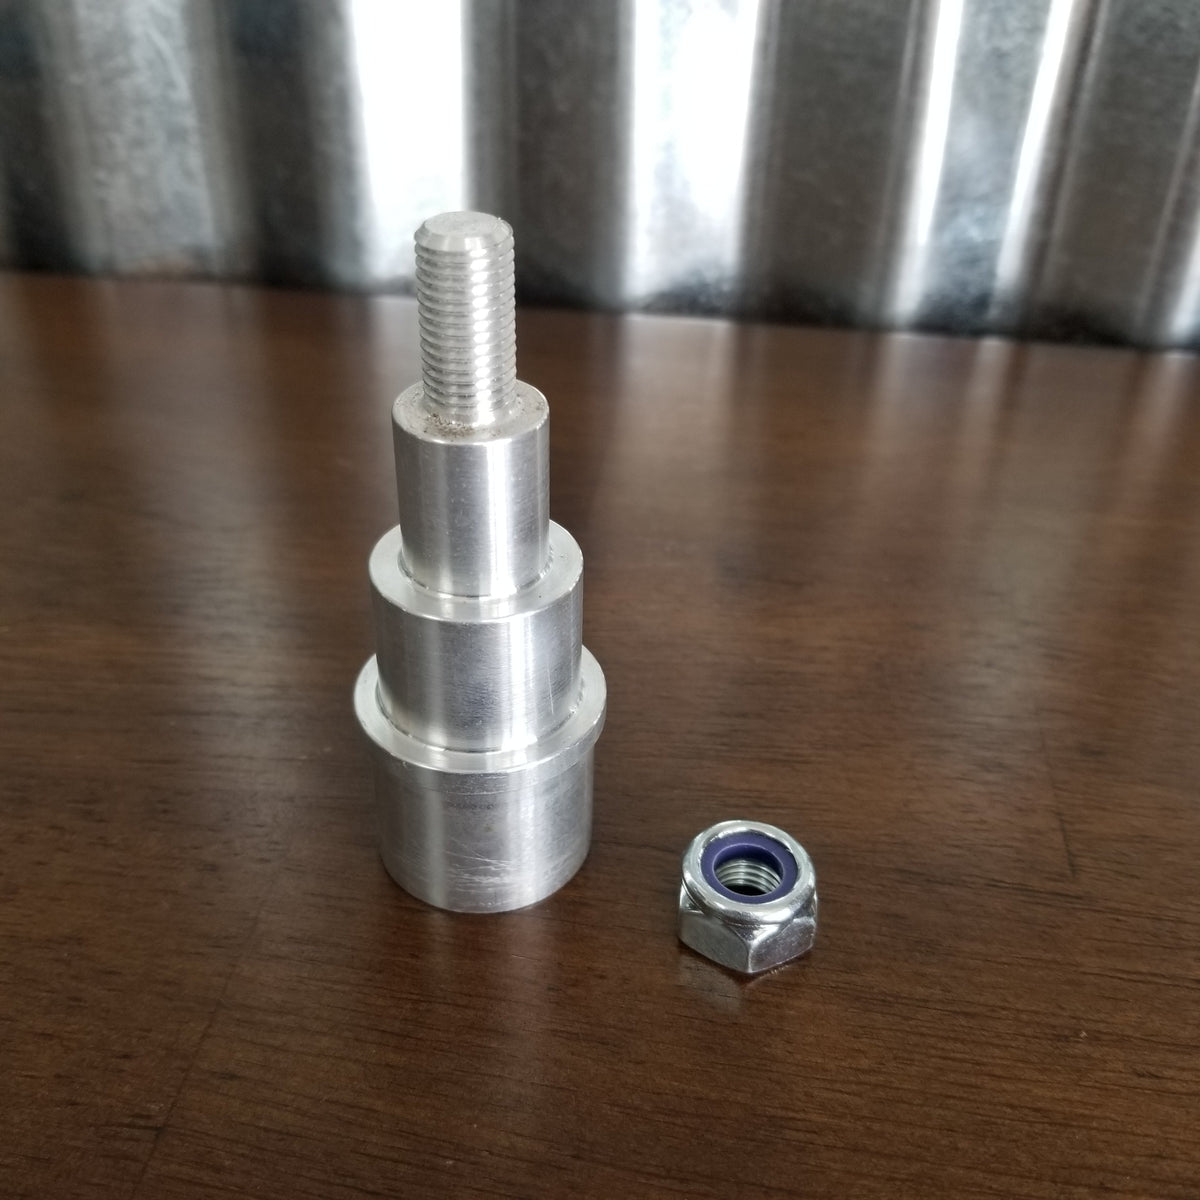 USA Made Kitchenaid Pasta Attachment Shaft Coupler Replacement